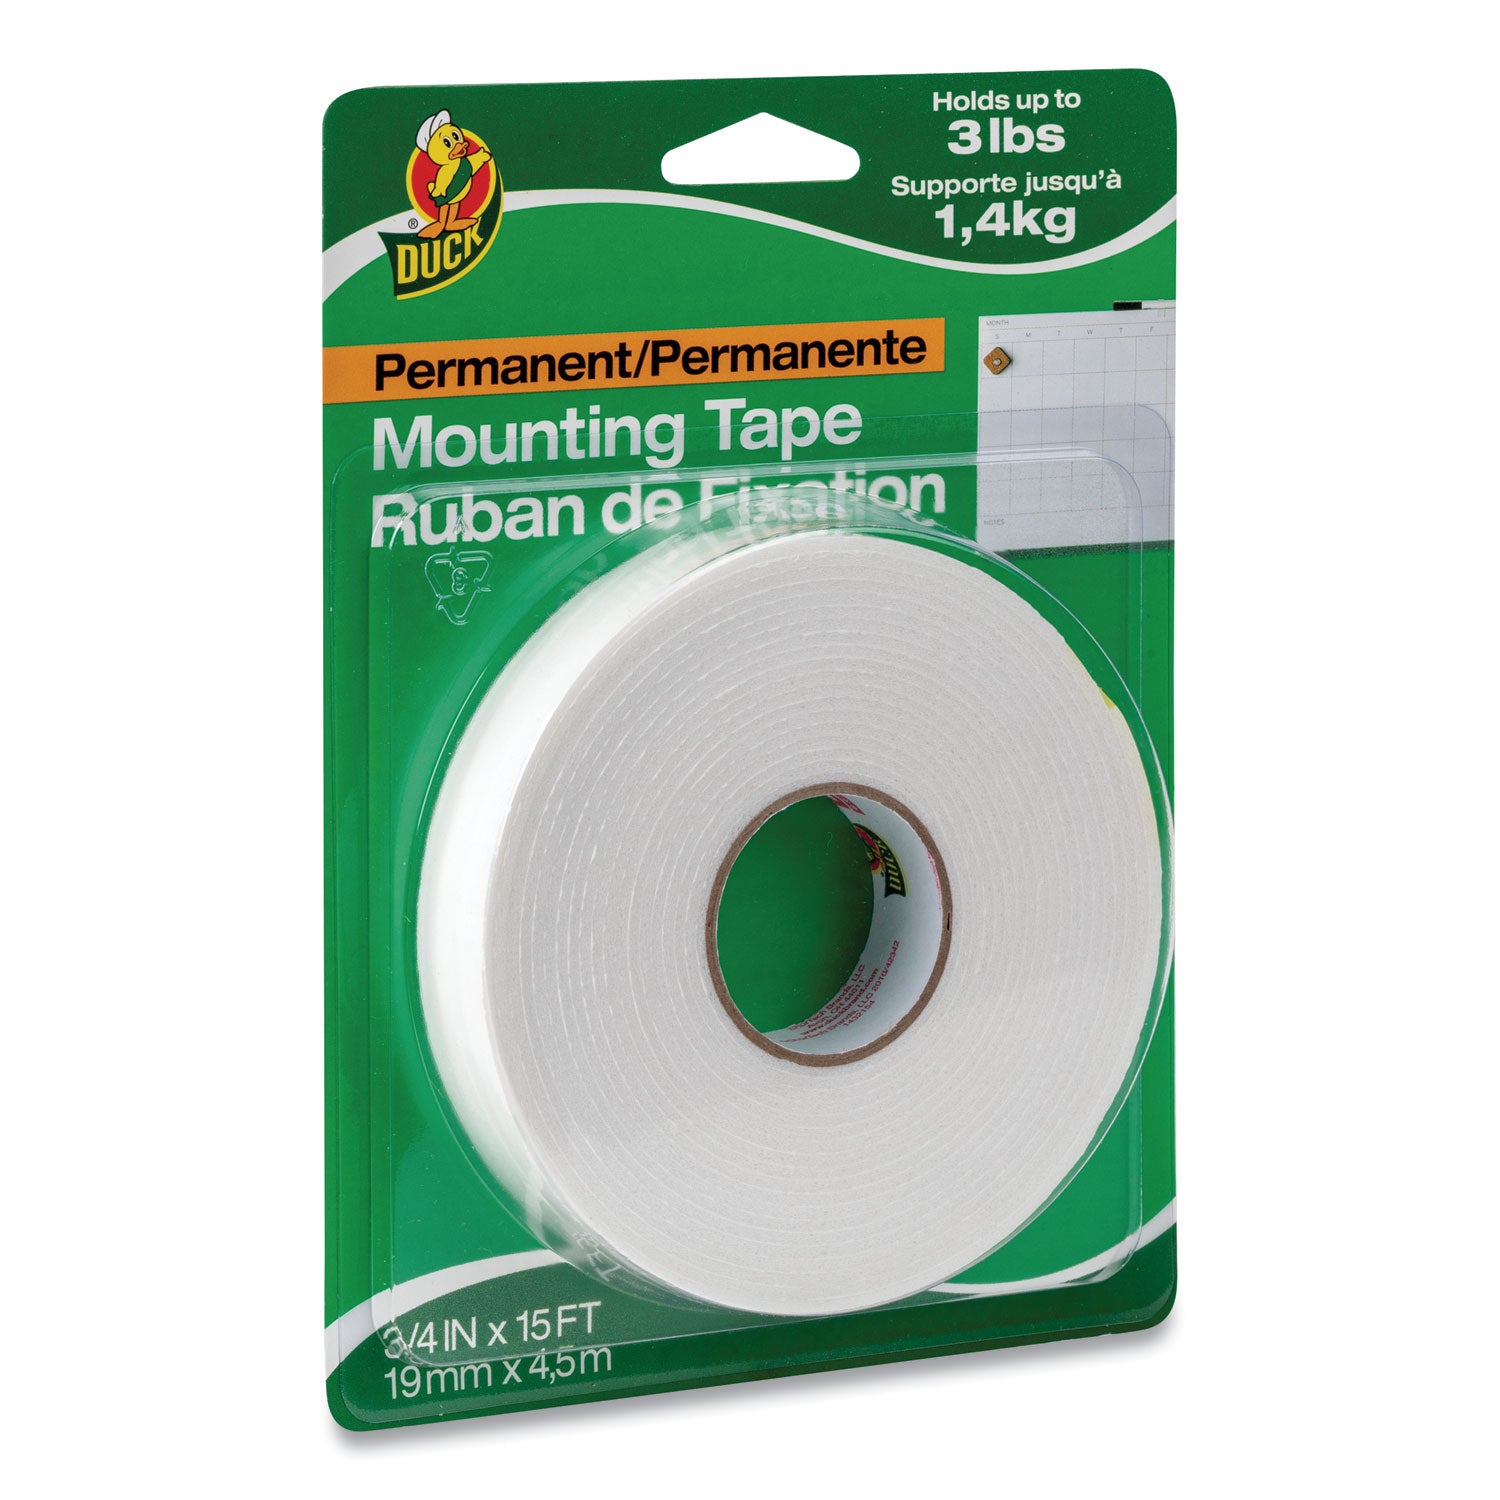 Double-Stick Foam Mounting Tape, Permanent, Holds Up to 2 lbs, 0.75" x 15 ft, White - 